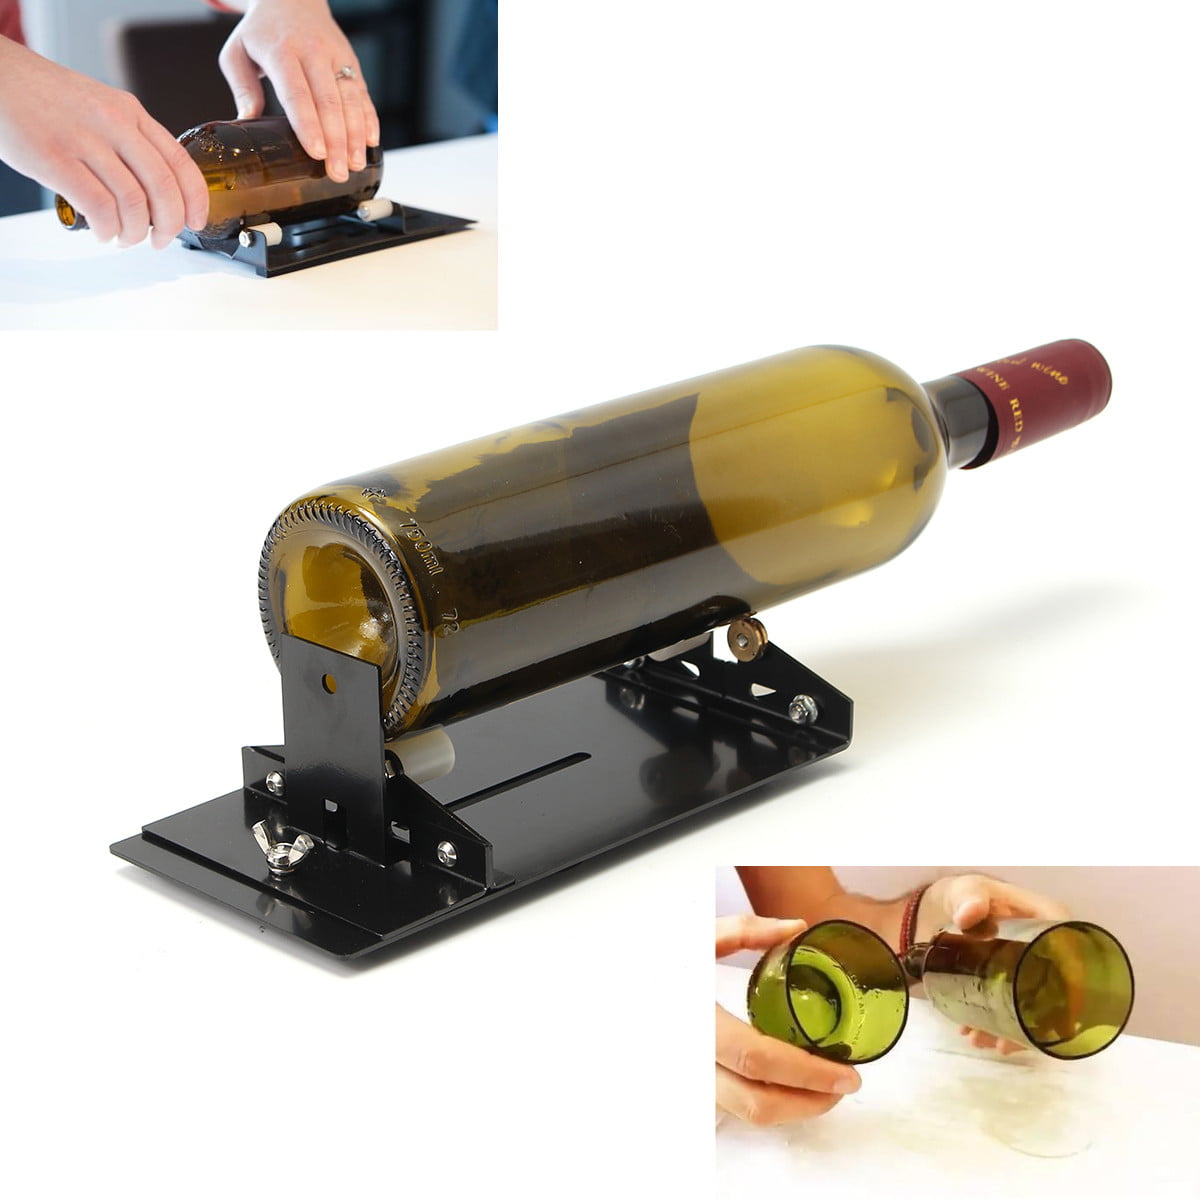 Glass Bottle Cutter Kit Beer Wine Jar DIY Cutting Machine Craft Recycle Tools US 